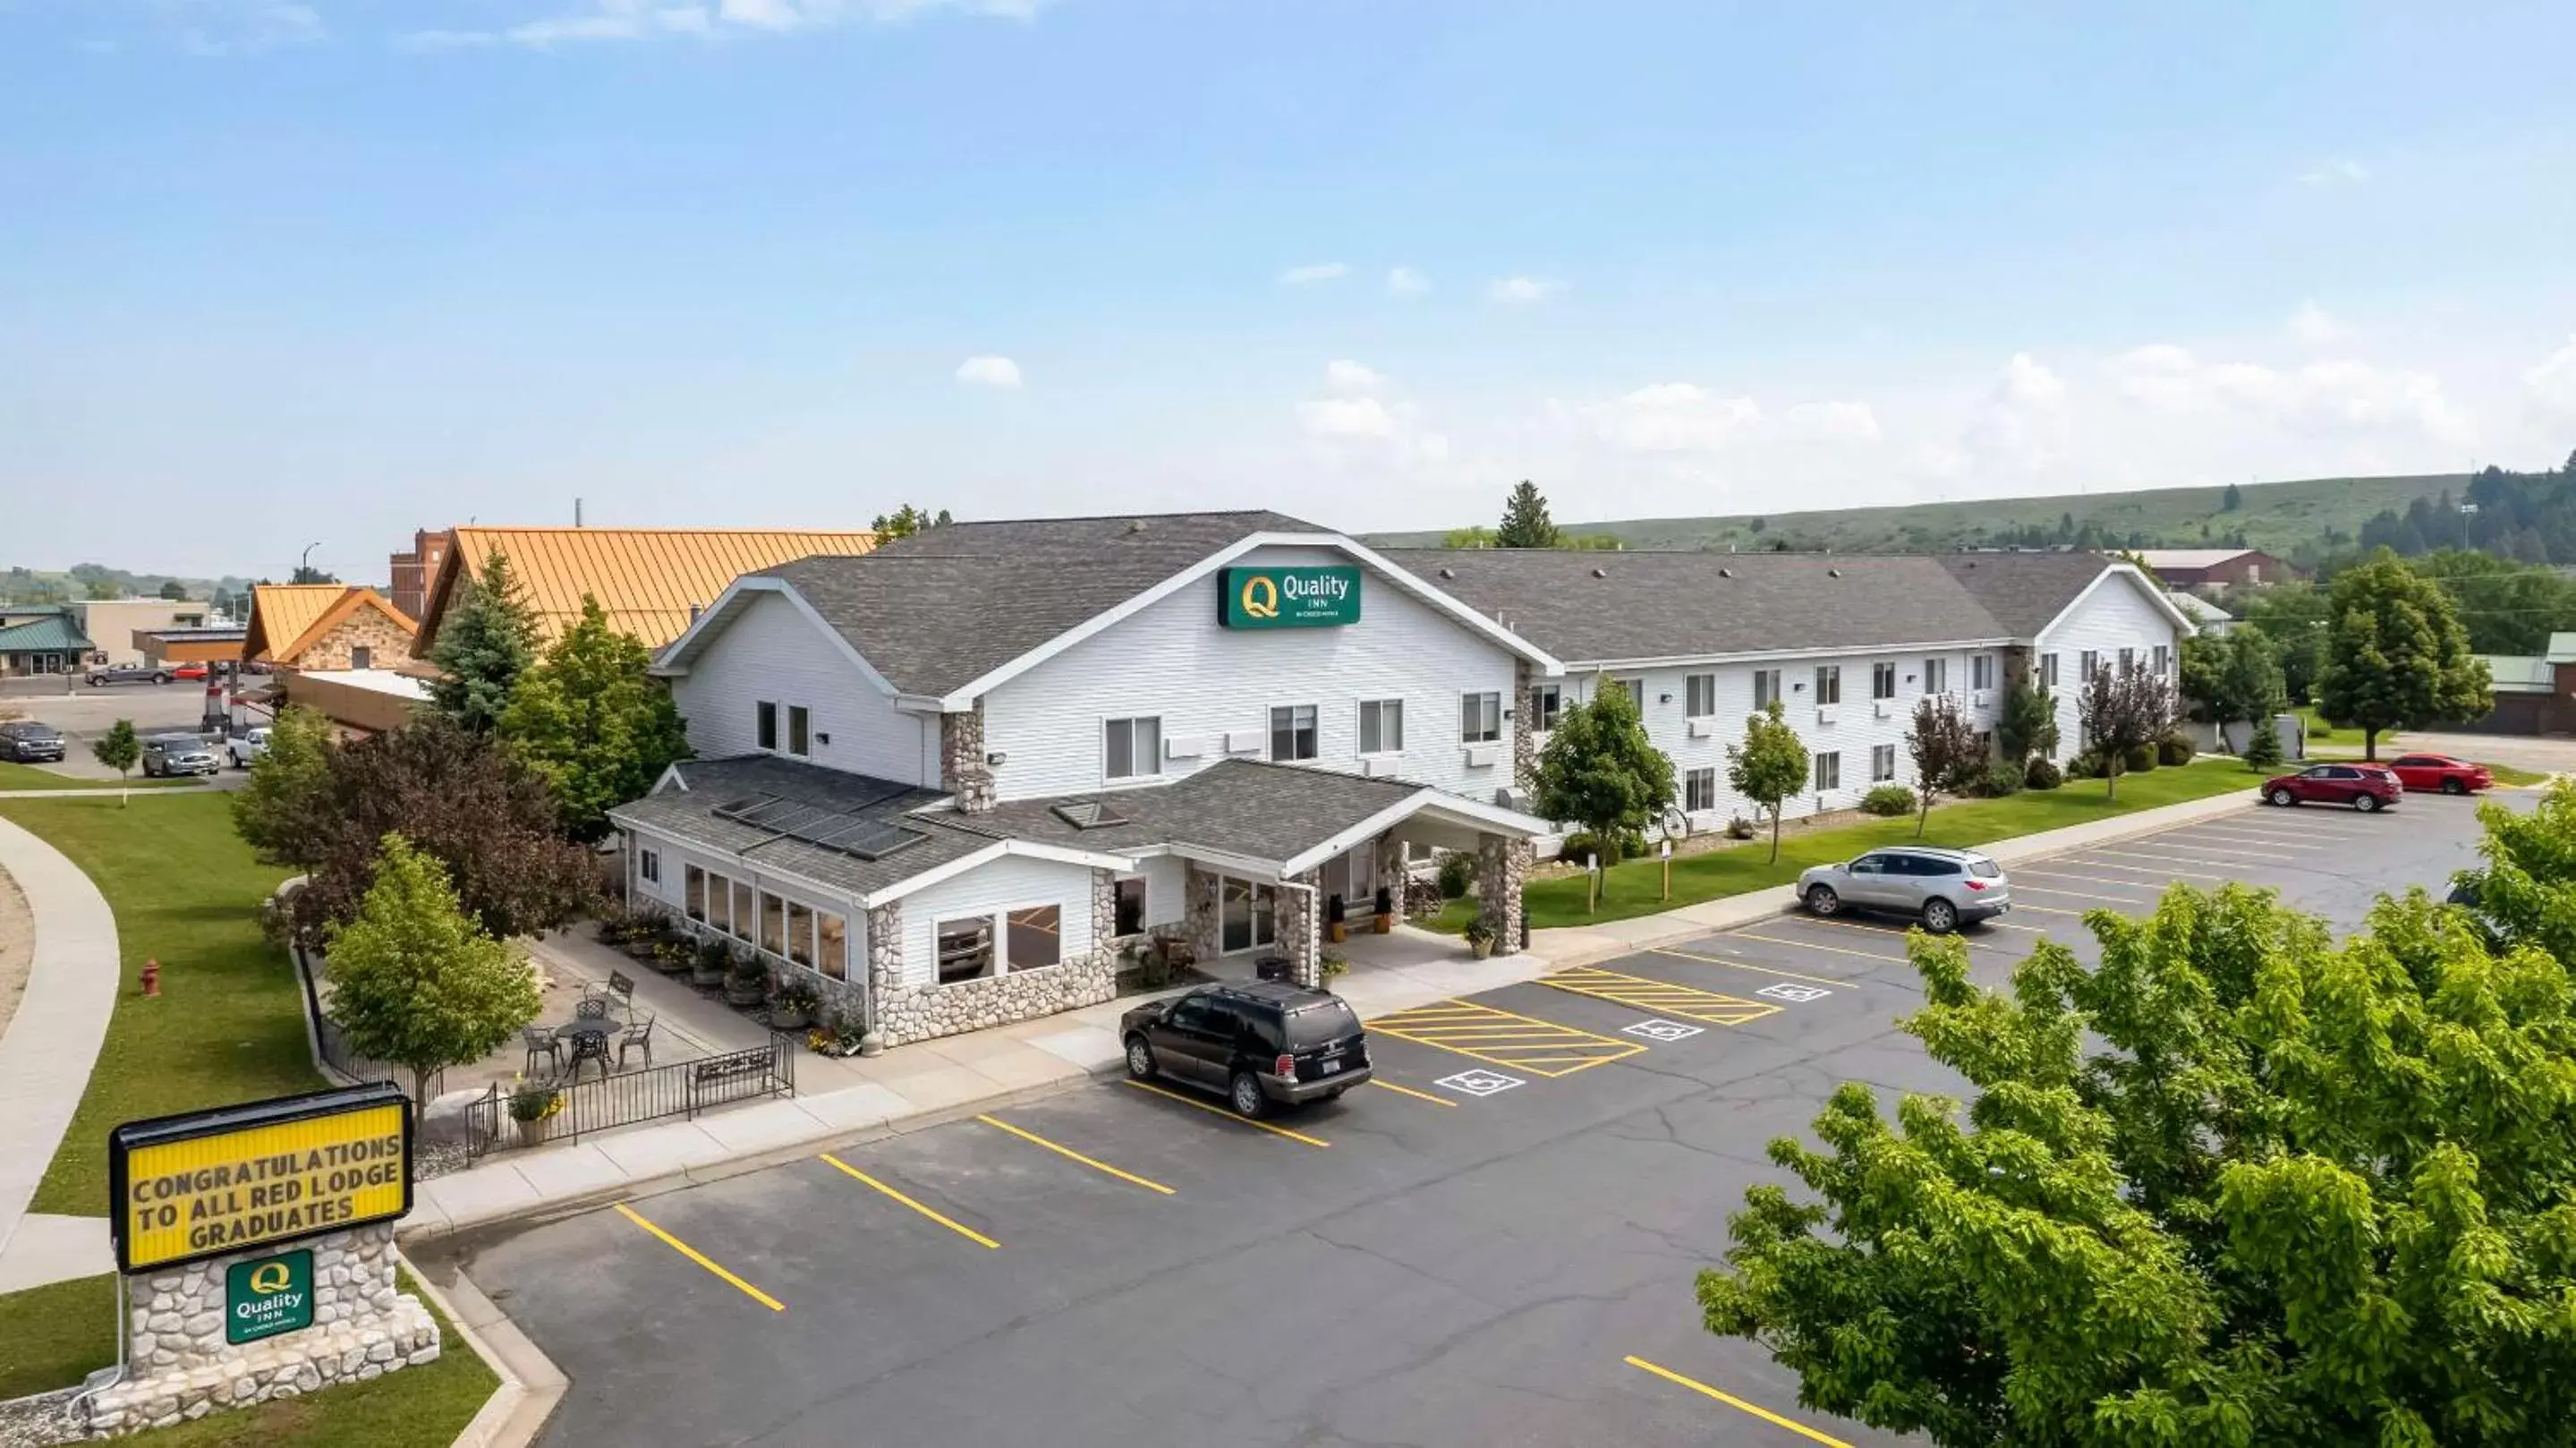 Property building, Bird's-eye View in Quality Inn Red Lodge Gateway To Yellowstone